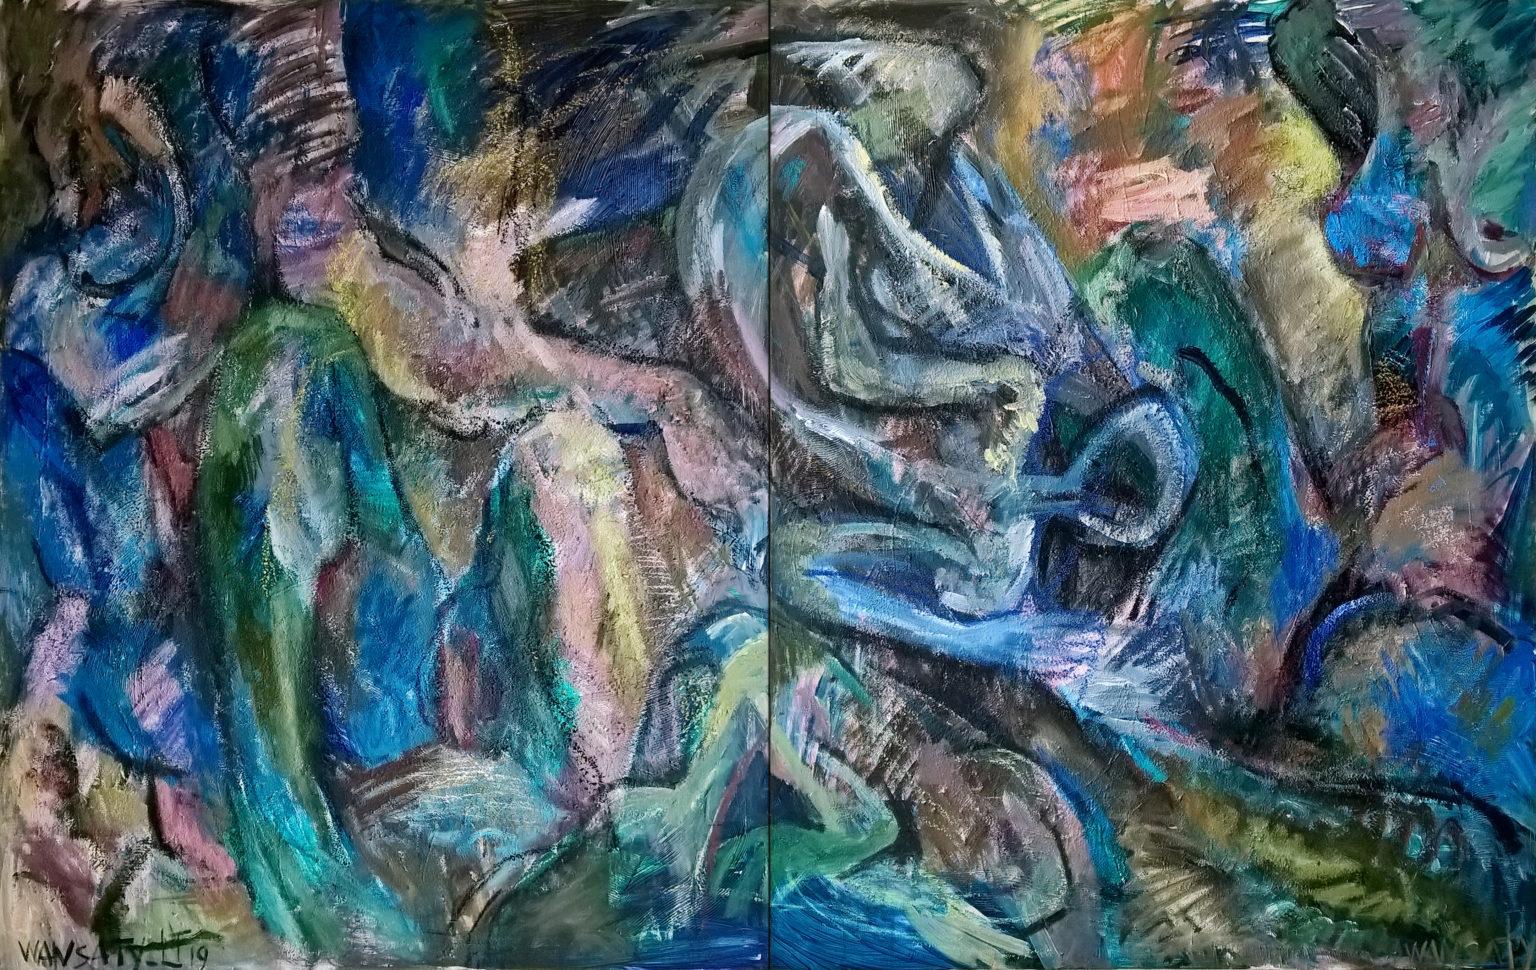 Diptych “Interaction 2”, 100 x 160cm - Neo-Expressionist Painting by Tatiana Levchenko